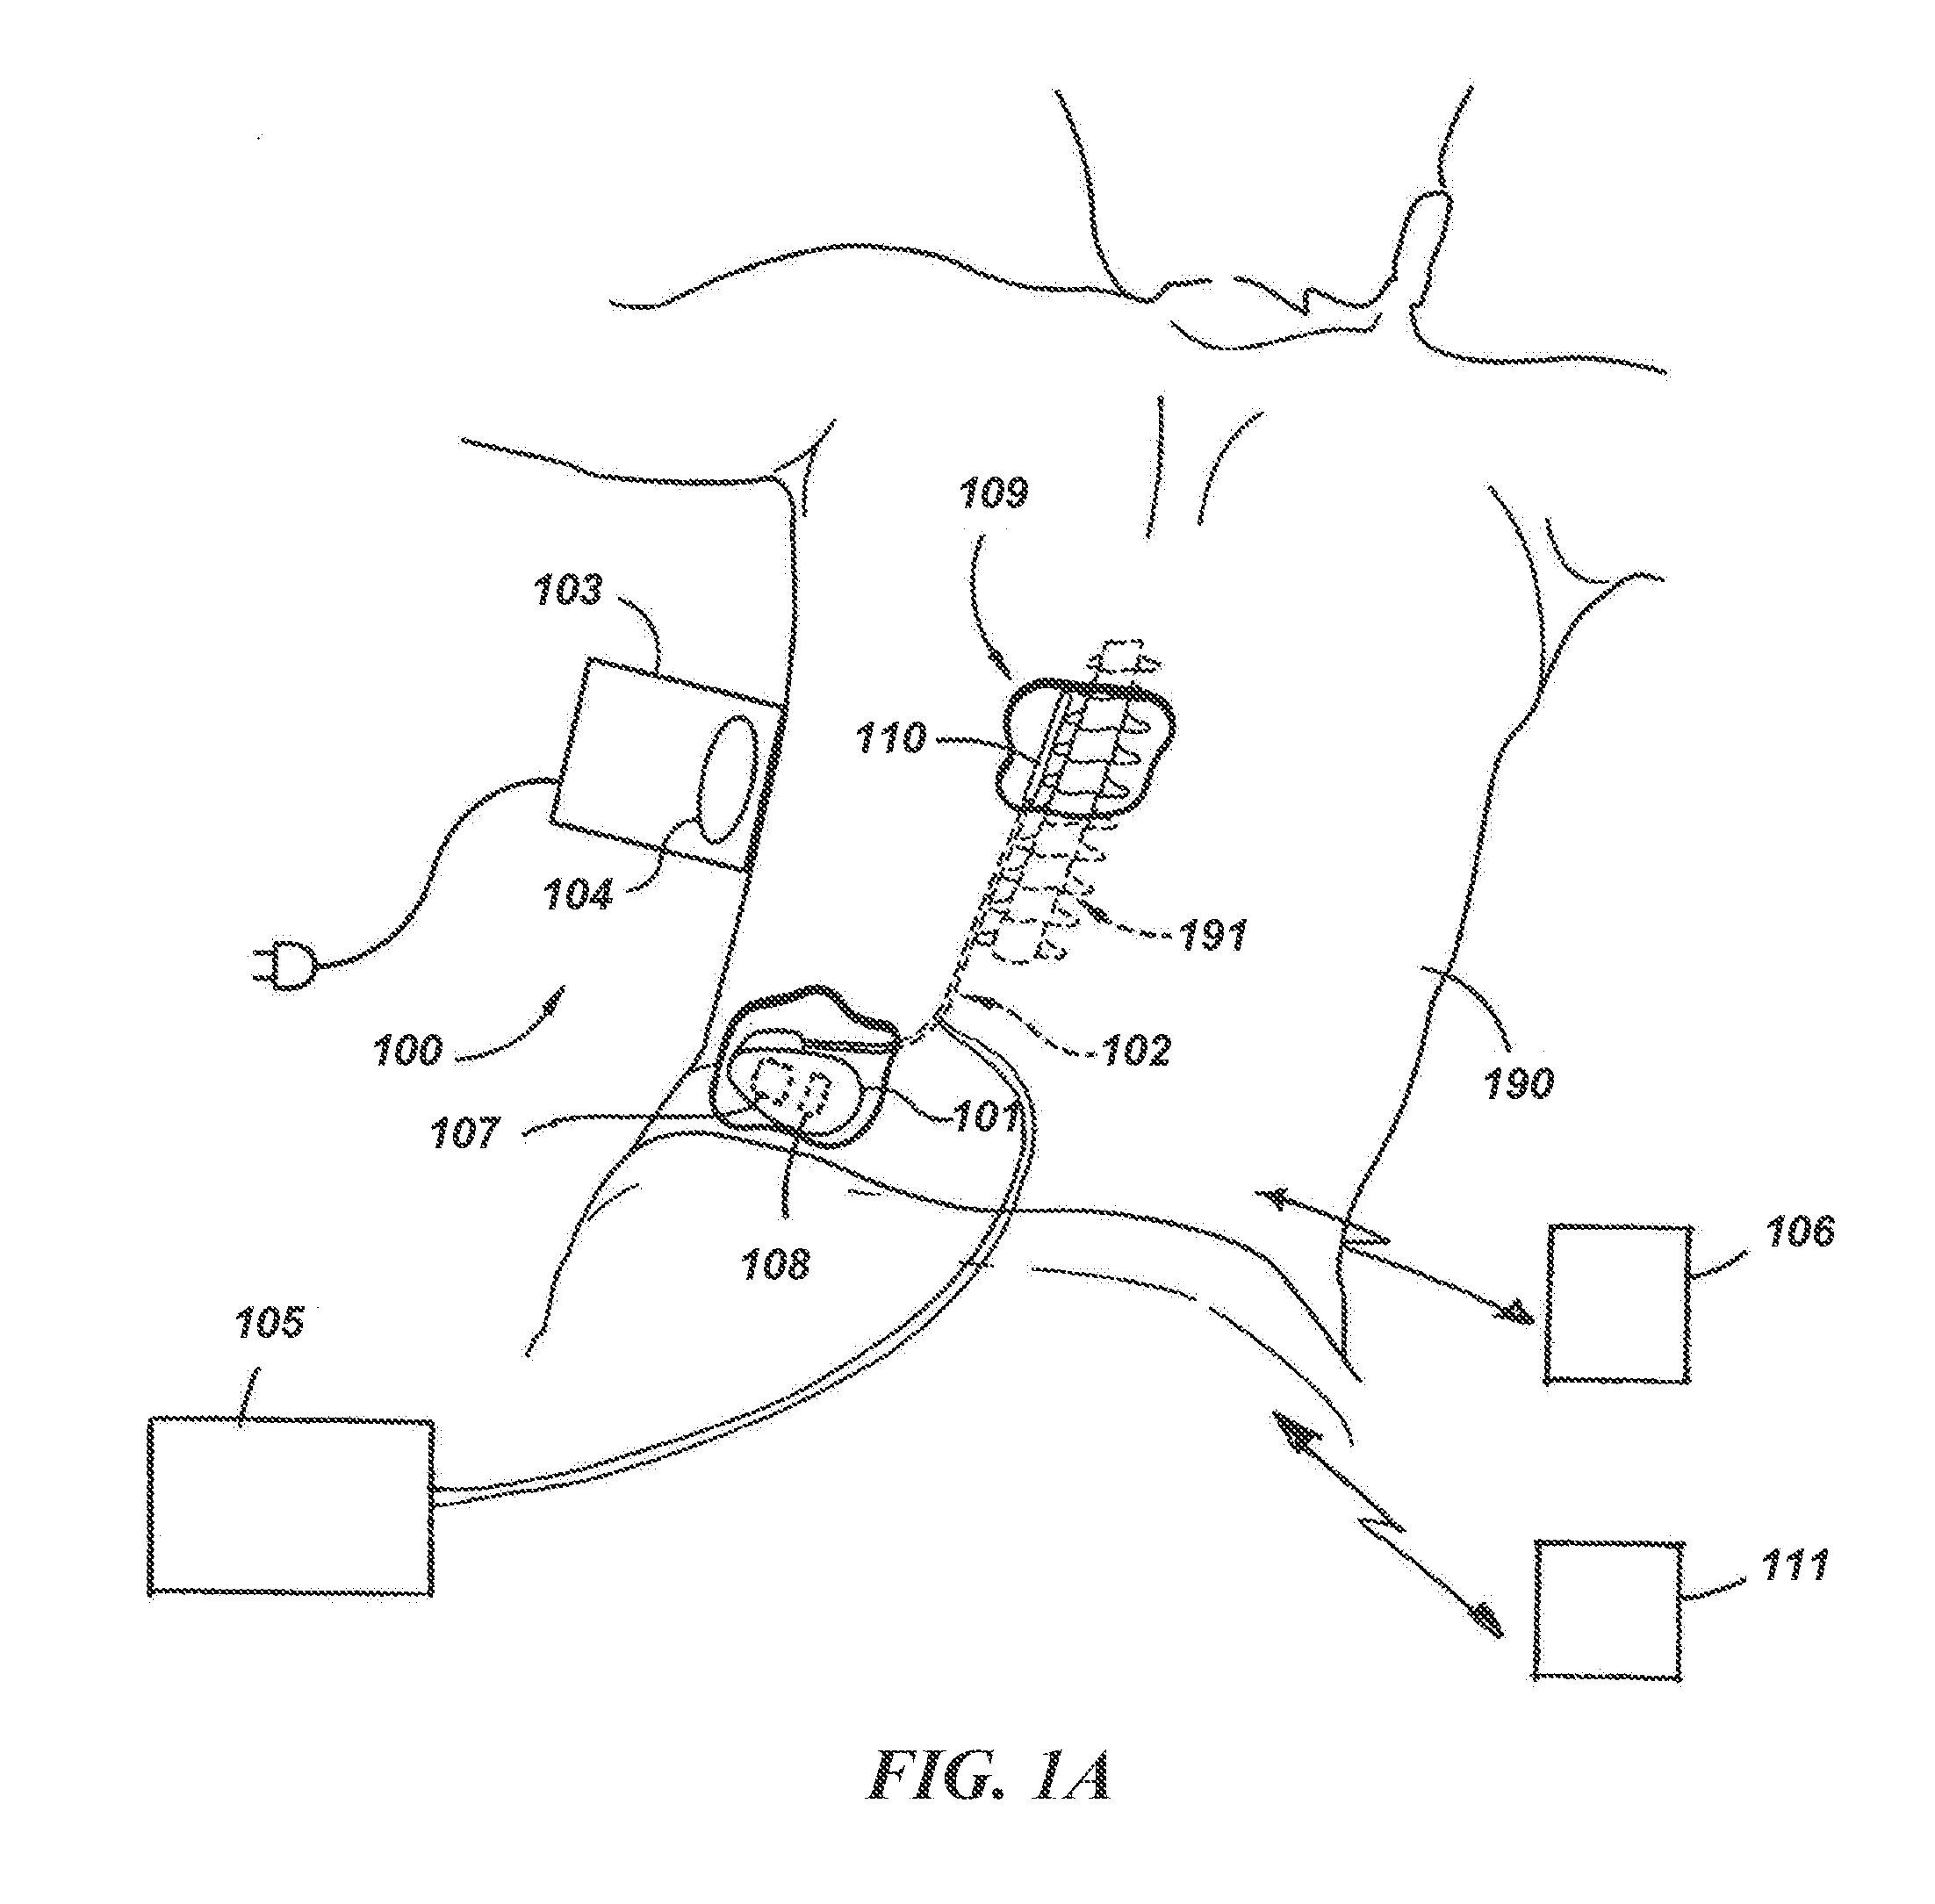 Linked area parameter adjustment for spinal cord stimulation and associated systems and methods